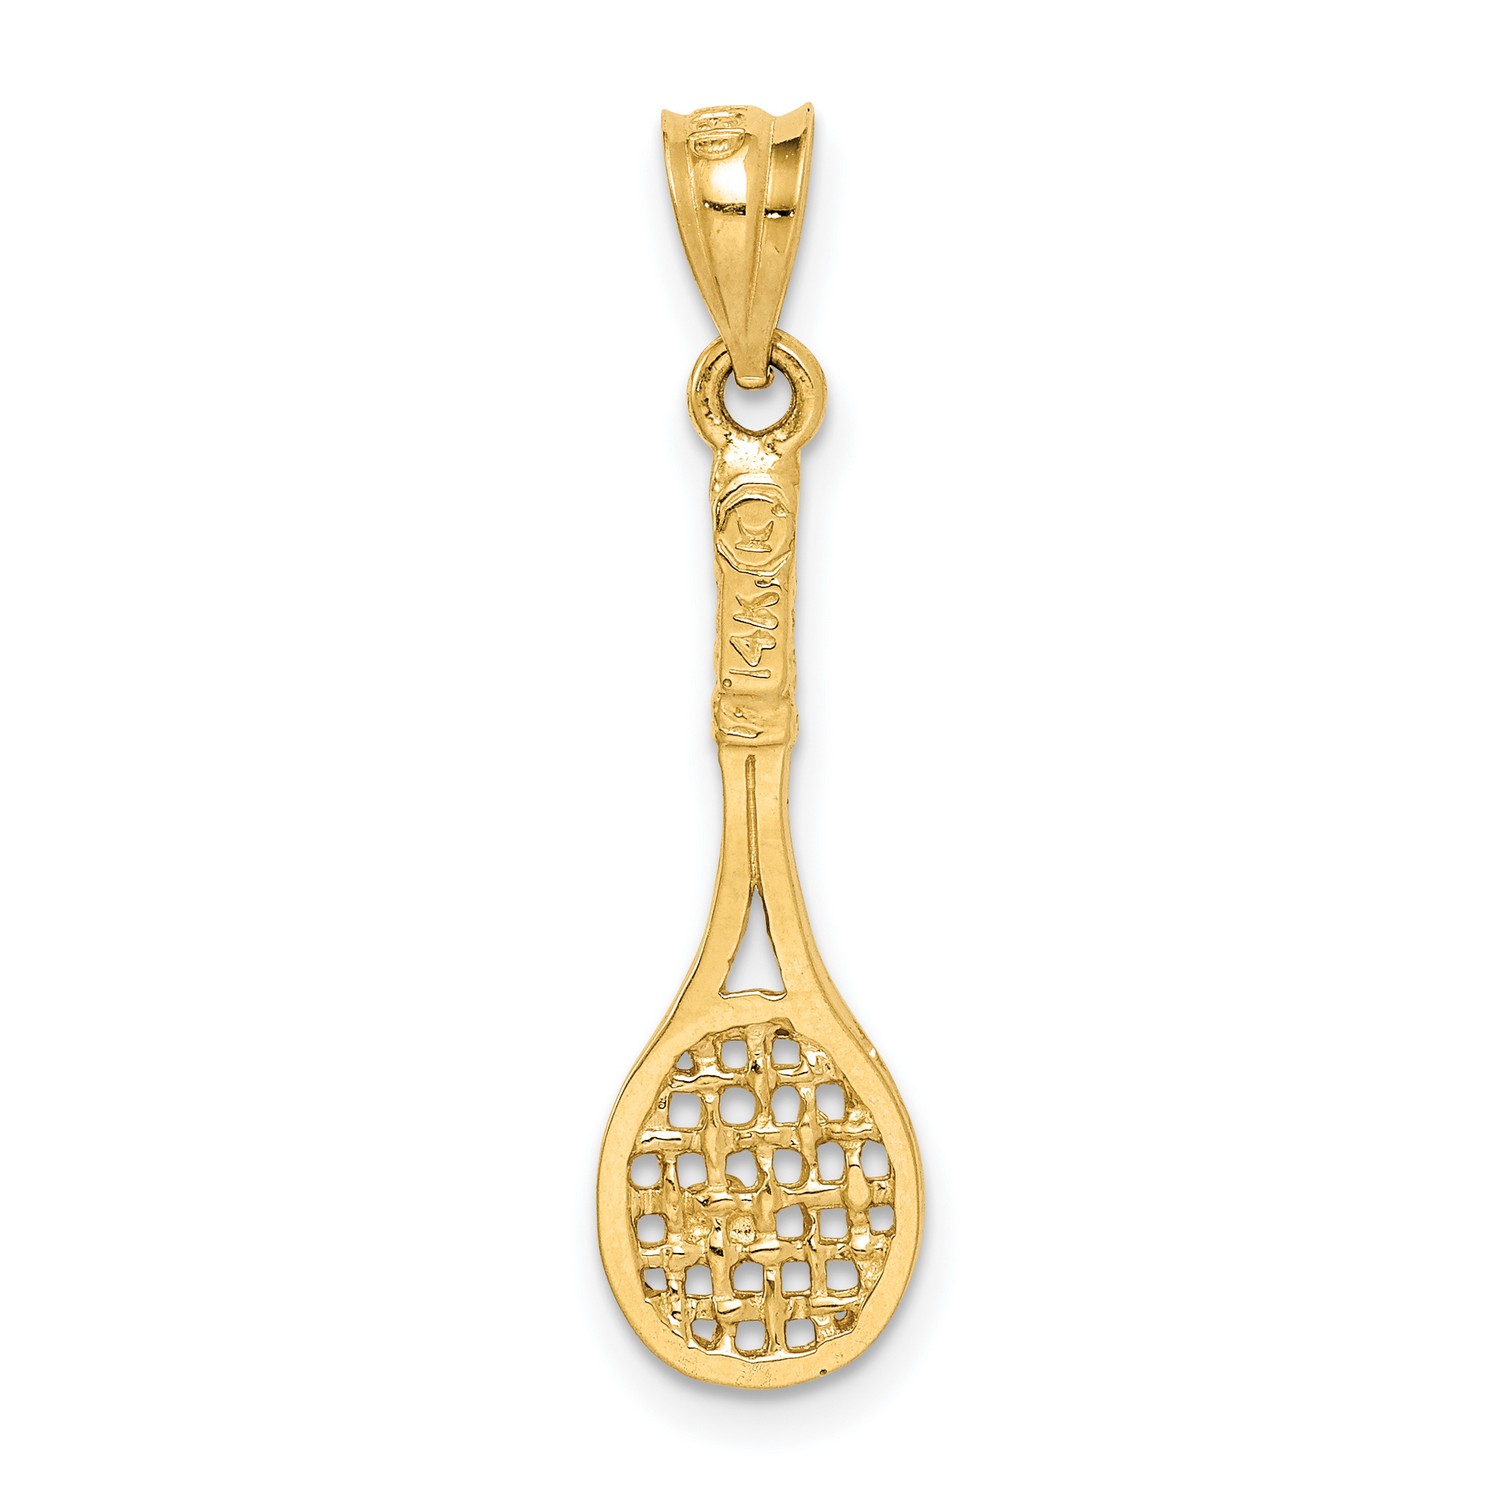 Details about   14K Yellow Gold Tennis Racquet and Ball Charm Pendant MSRP $120